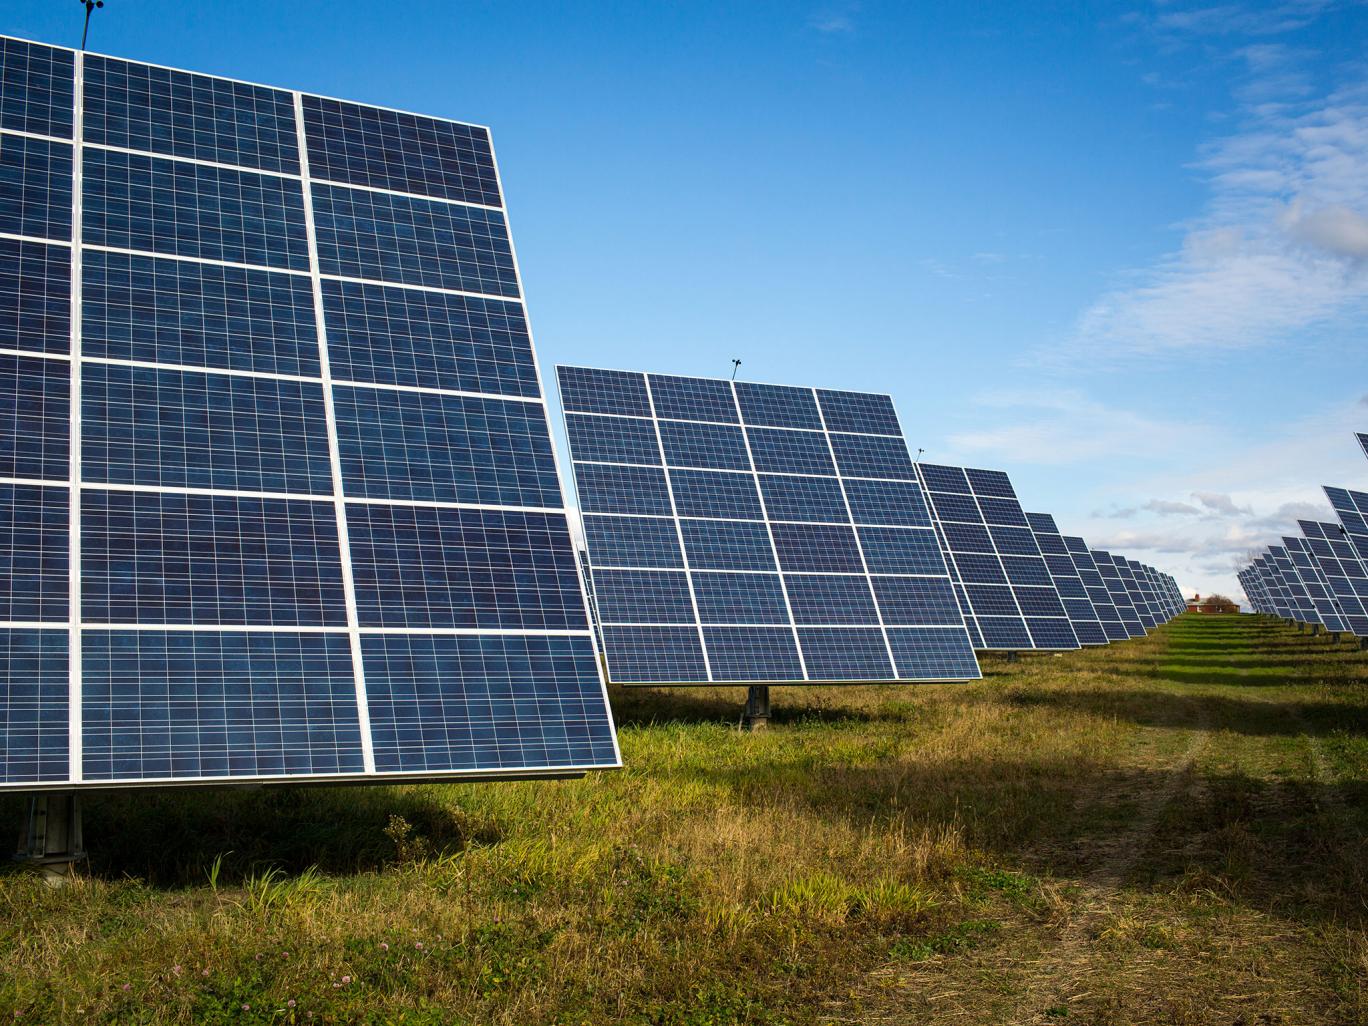 The town of Woodland, North Carolina rejected a free solar farm. These backward hillbilly Republitards are afraid solar panels will suck the energy out of the sun. Republitards, one step lower than dumb.